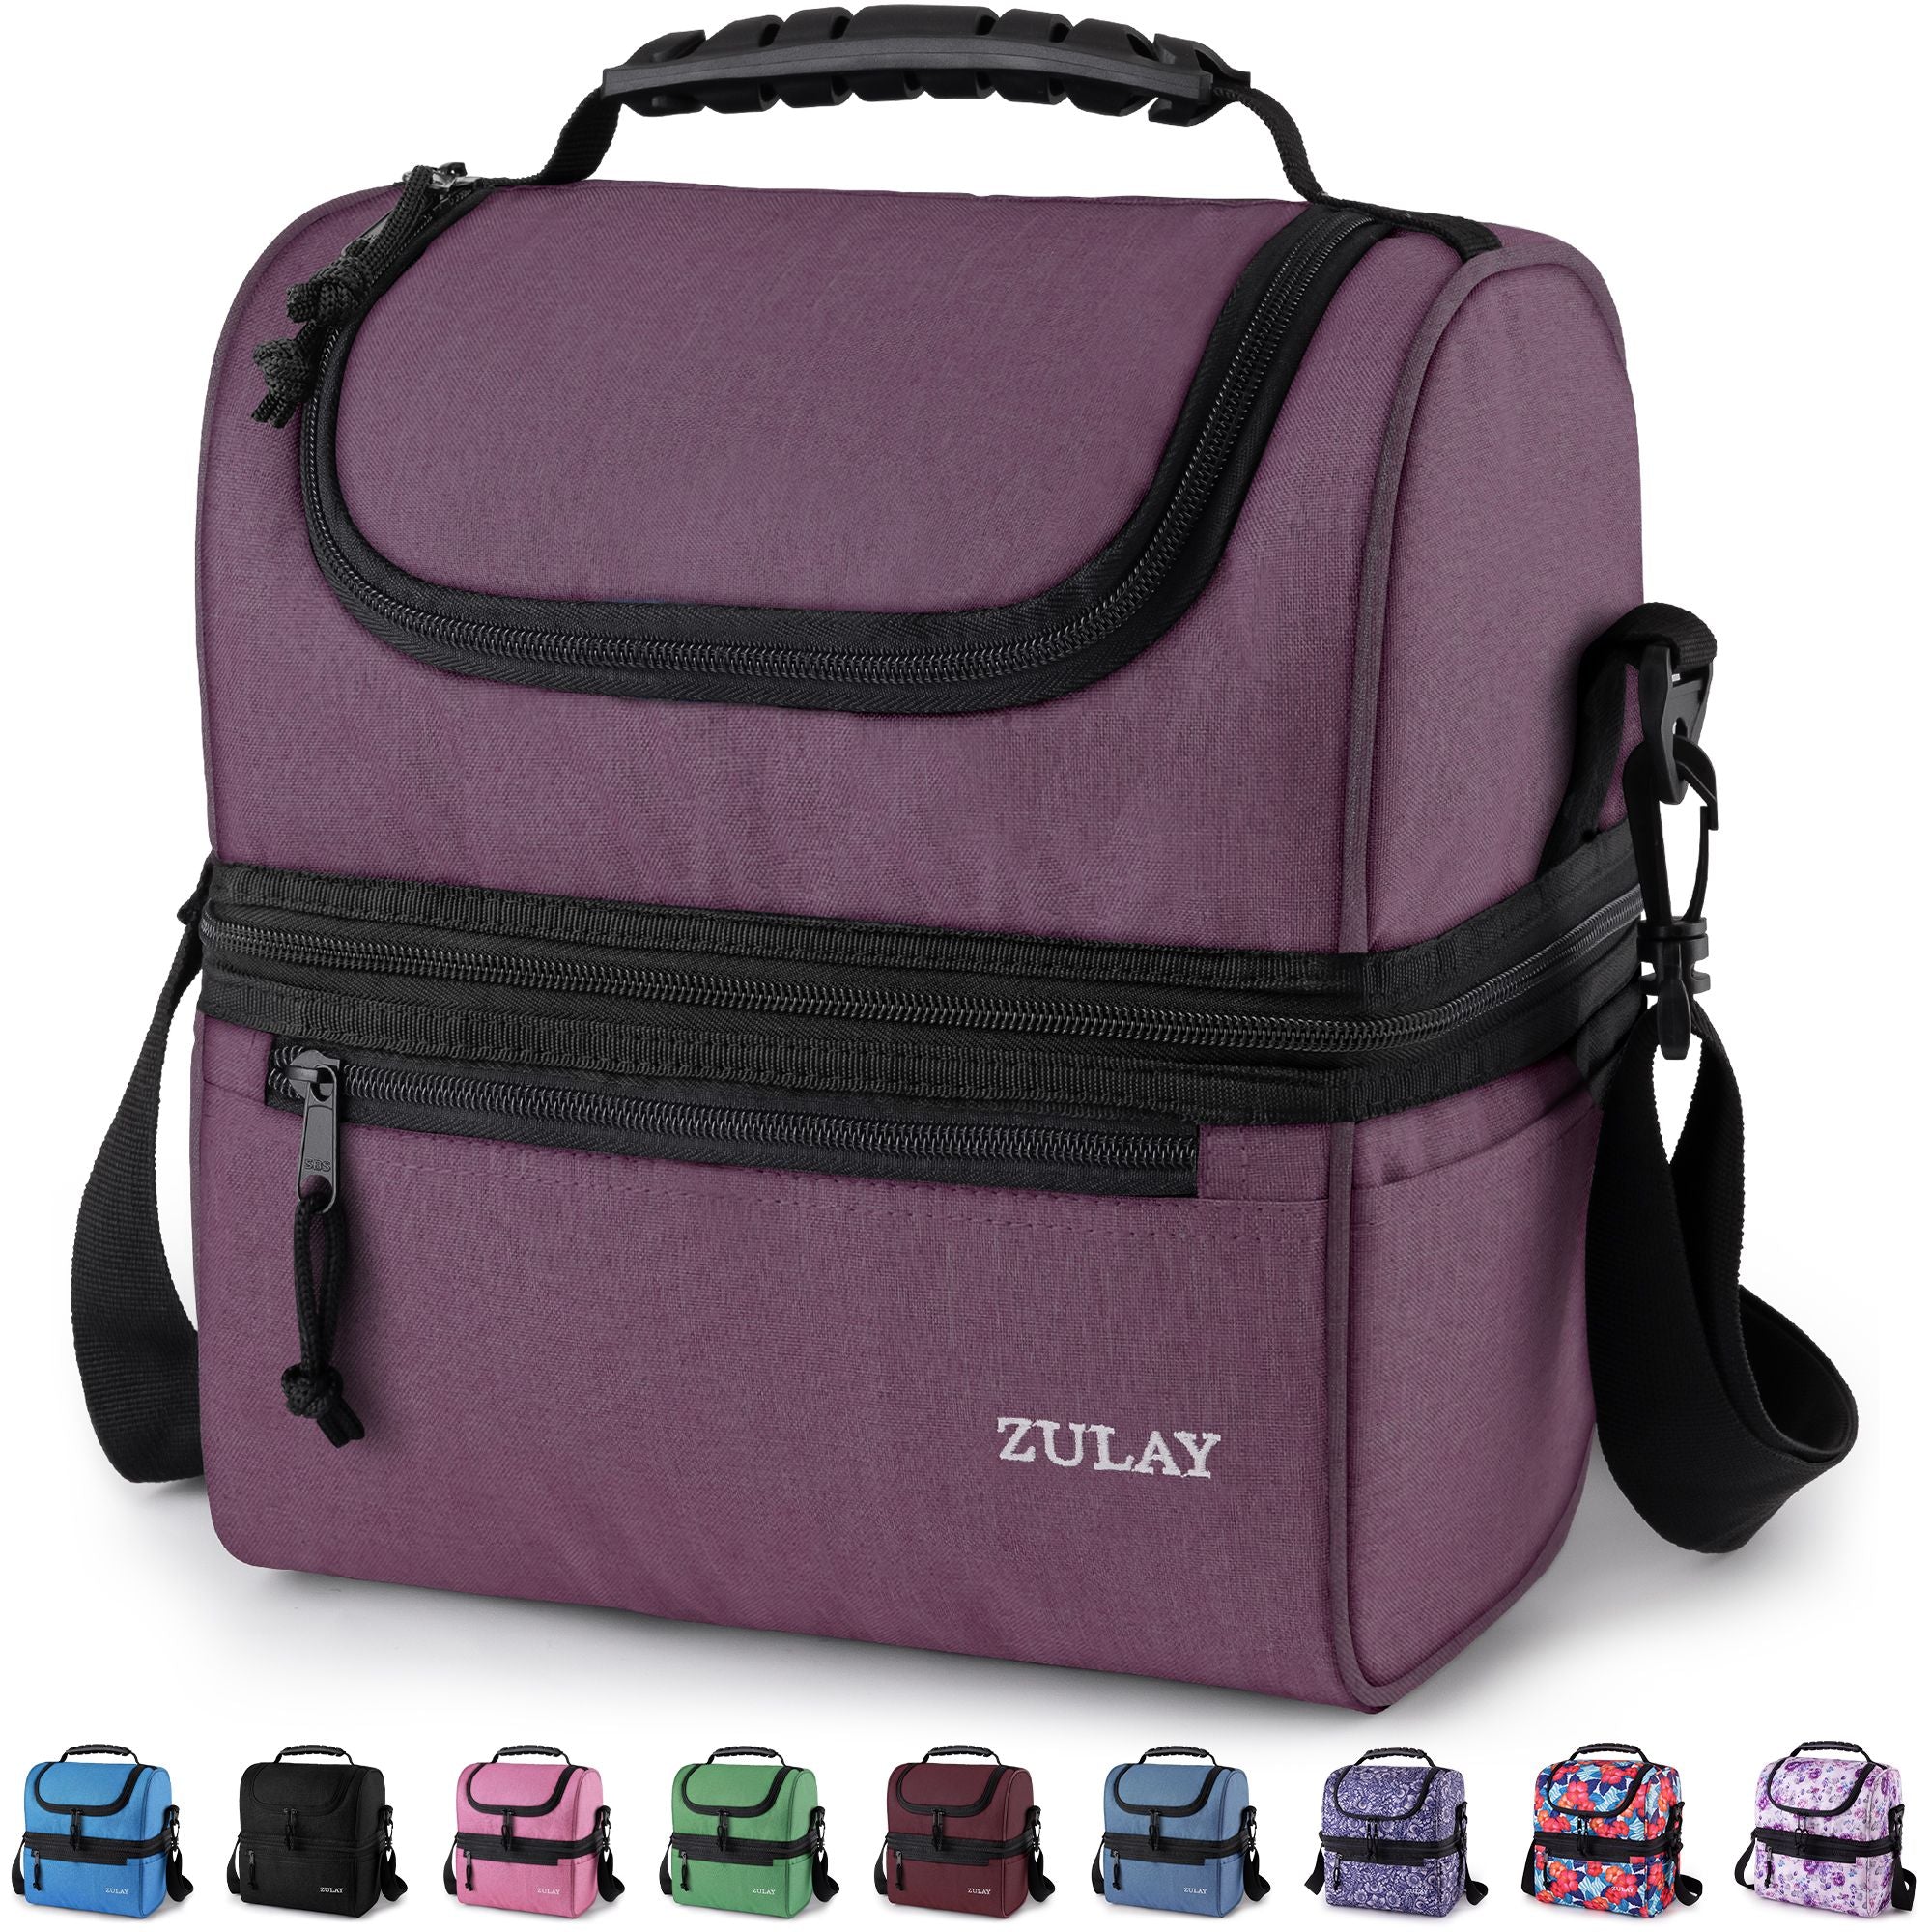 Zulay Kitchen Insulated Lunch Bag With Compartment & Built-In Handle -  Shark Camouflage, 1 - Dillons Food Stores